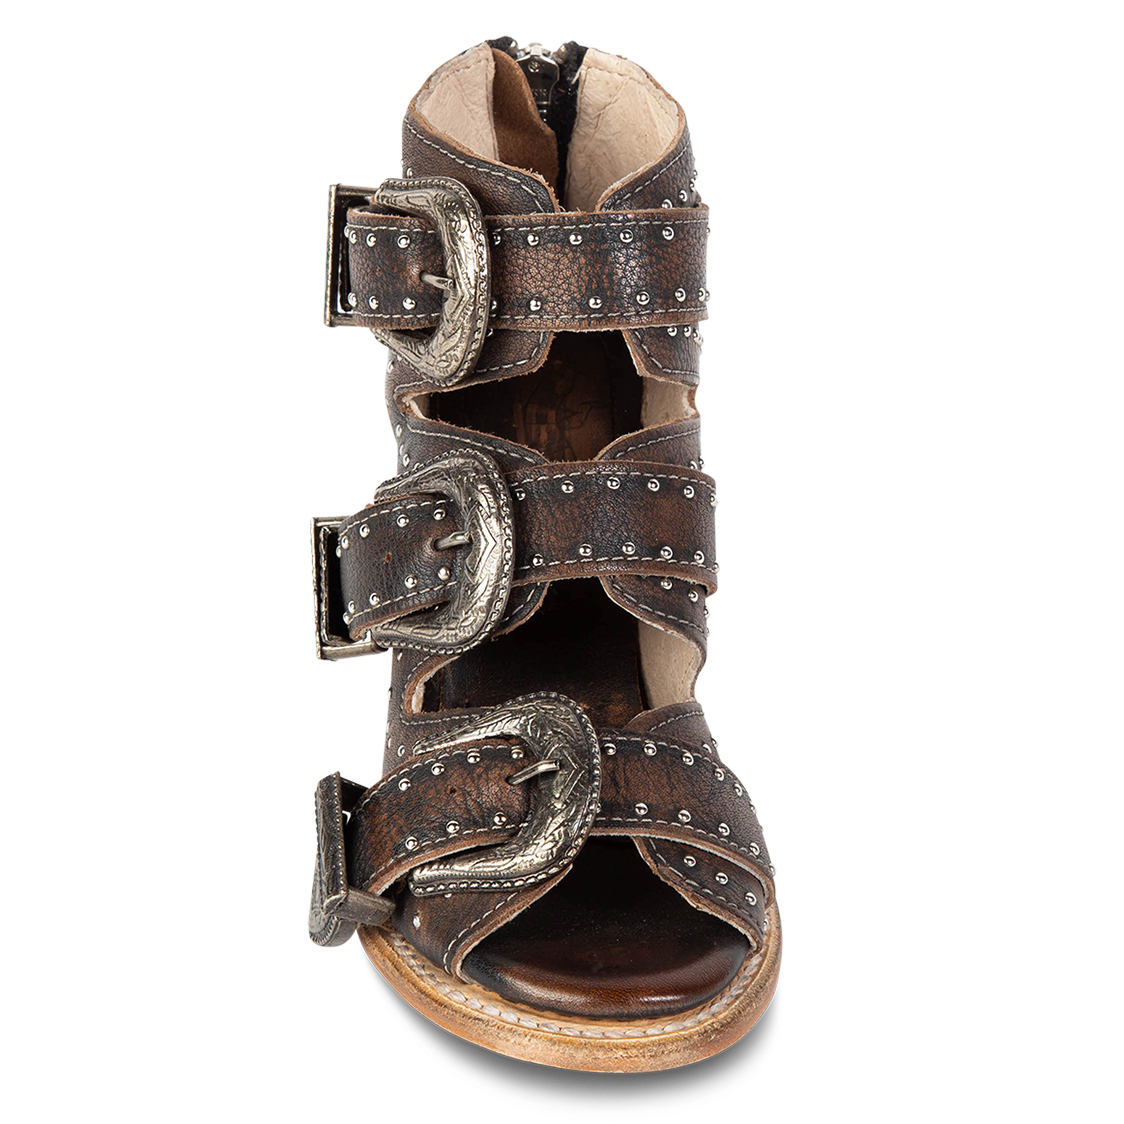 Front view showing open toe construction with adjustable studded leather straps on FREEBIRD women's Violet black sandal